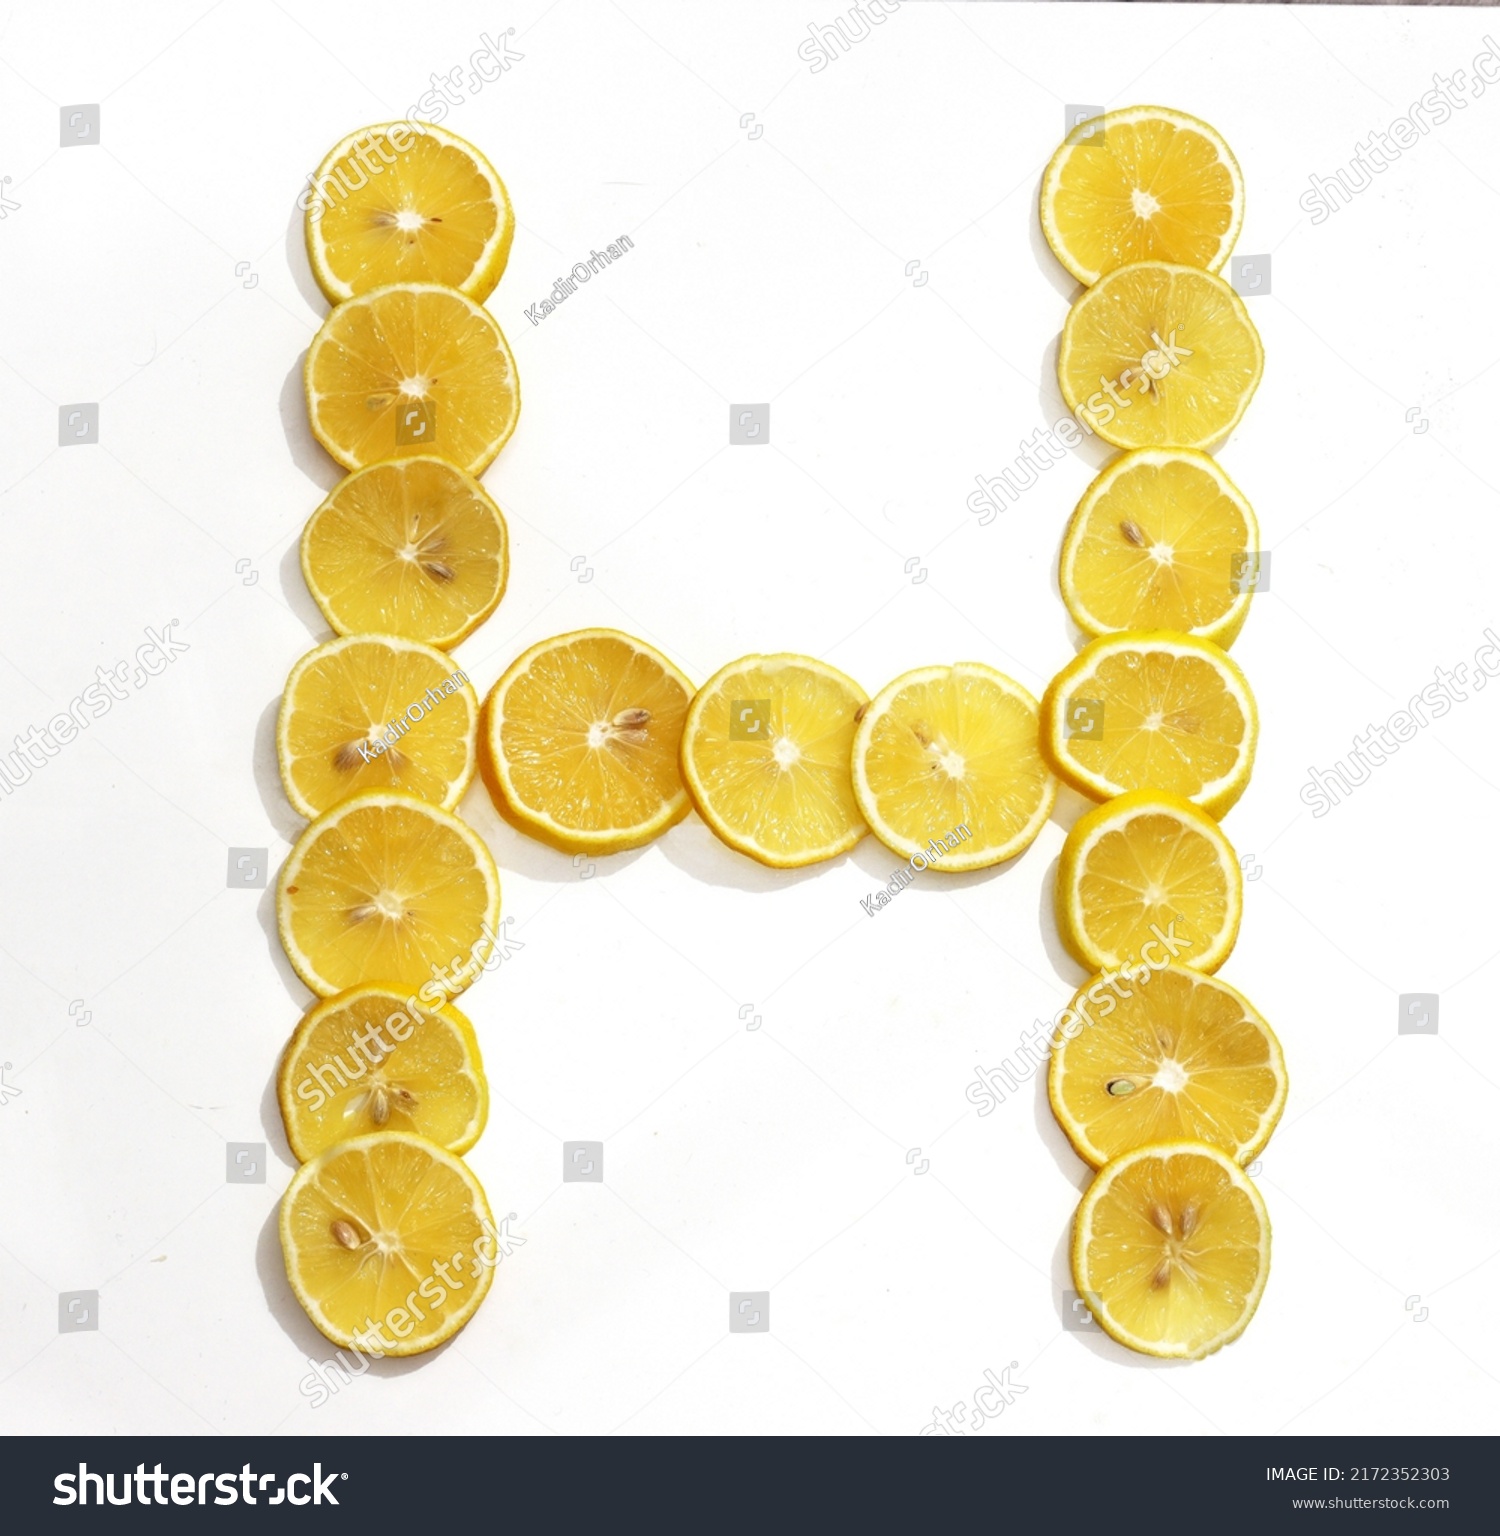 Letter H made with citrus fruits on white background as vitamin representation, top view.Letter C made with citrus fruits  on white background as vitamin representation, top view. Lemon letter. #2172352303